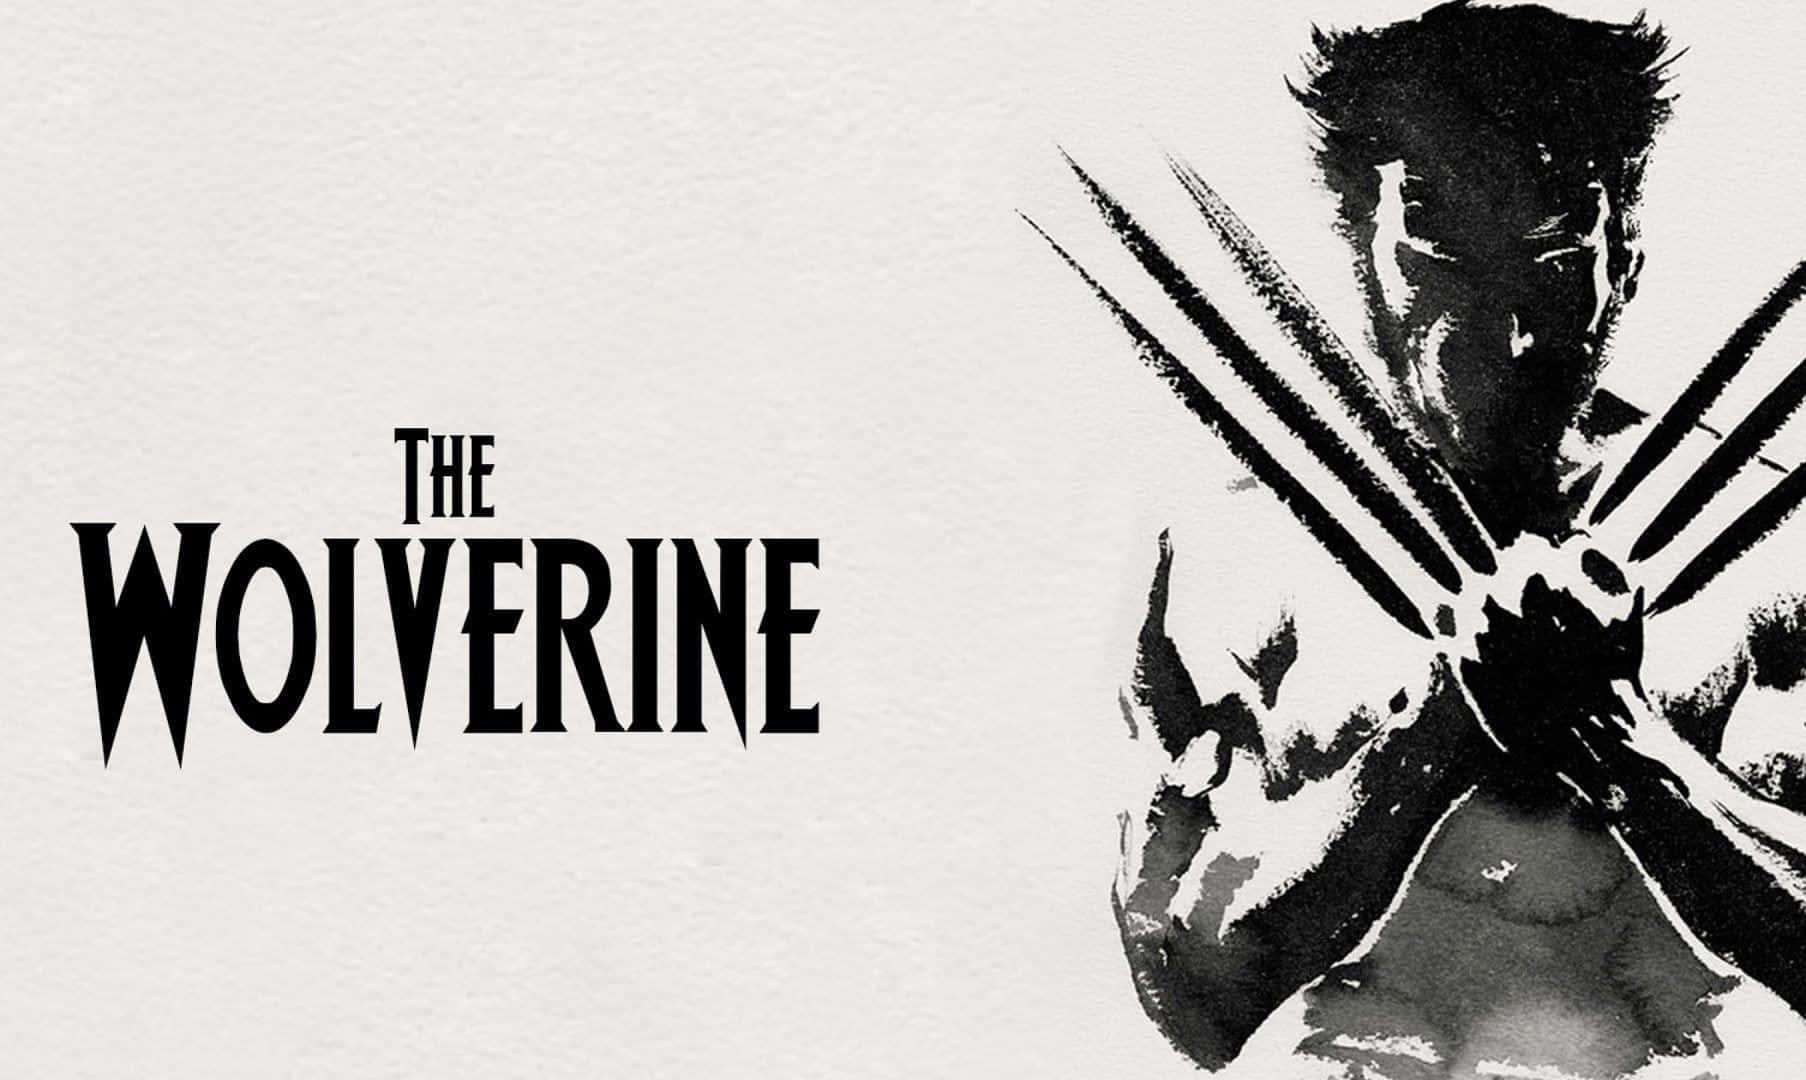 Wolverine ready for battle